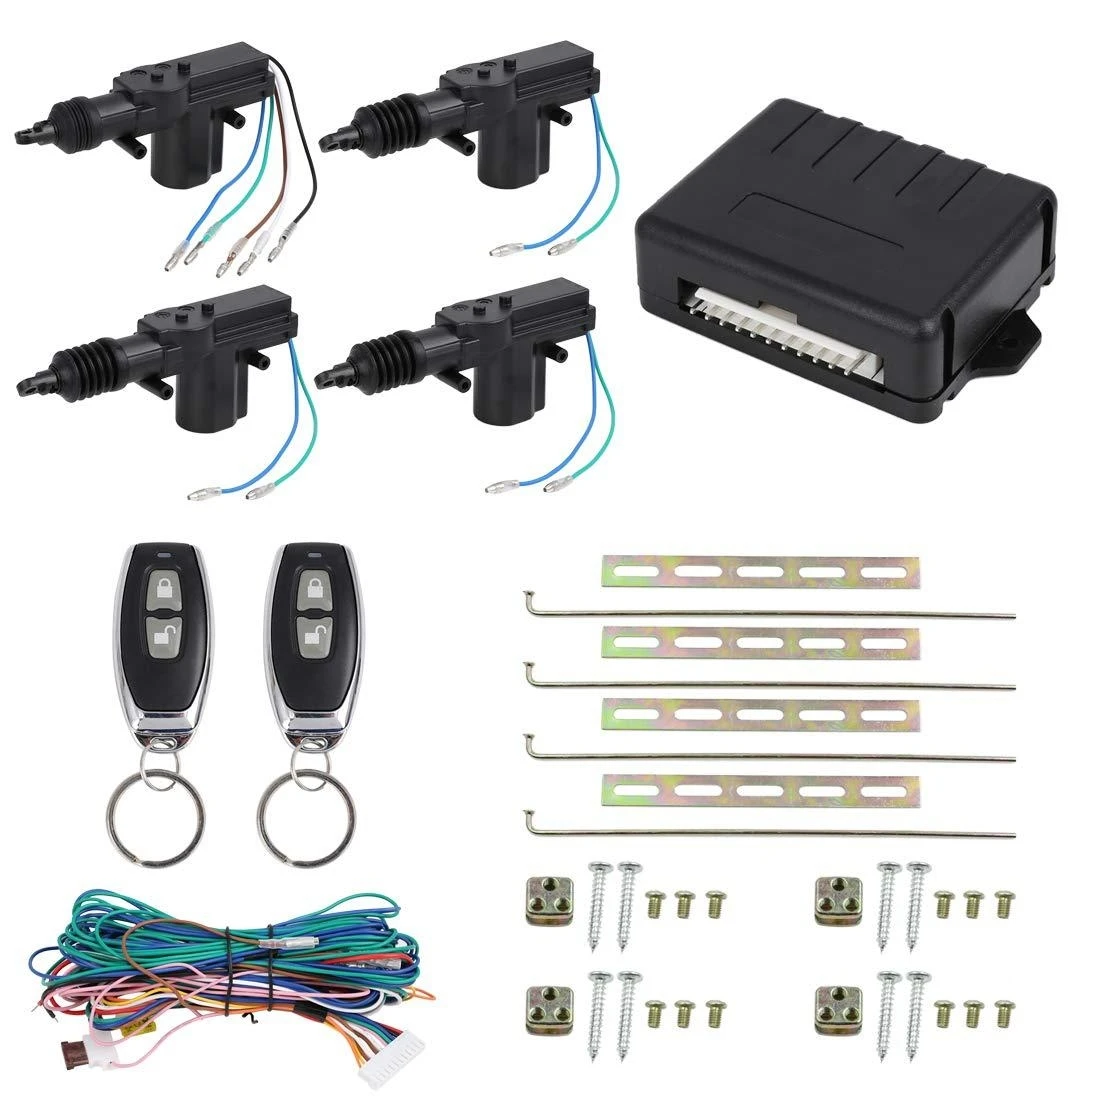 

12V Universal 4 Doors Central Lock Locking System Car Keyless Entry Kit with Actuator Car One Button Start Remote Control System